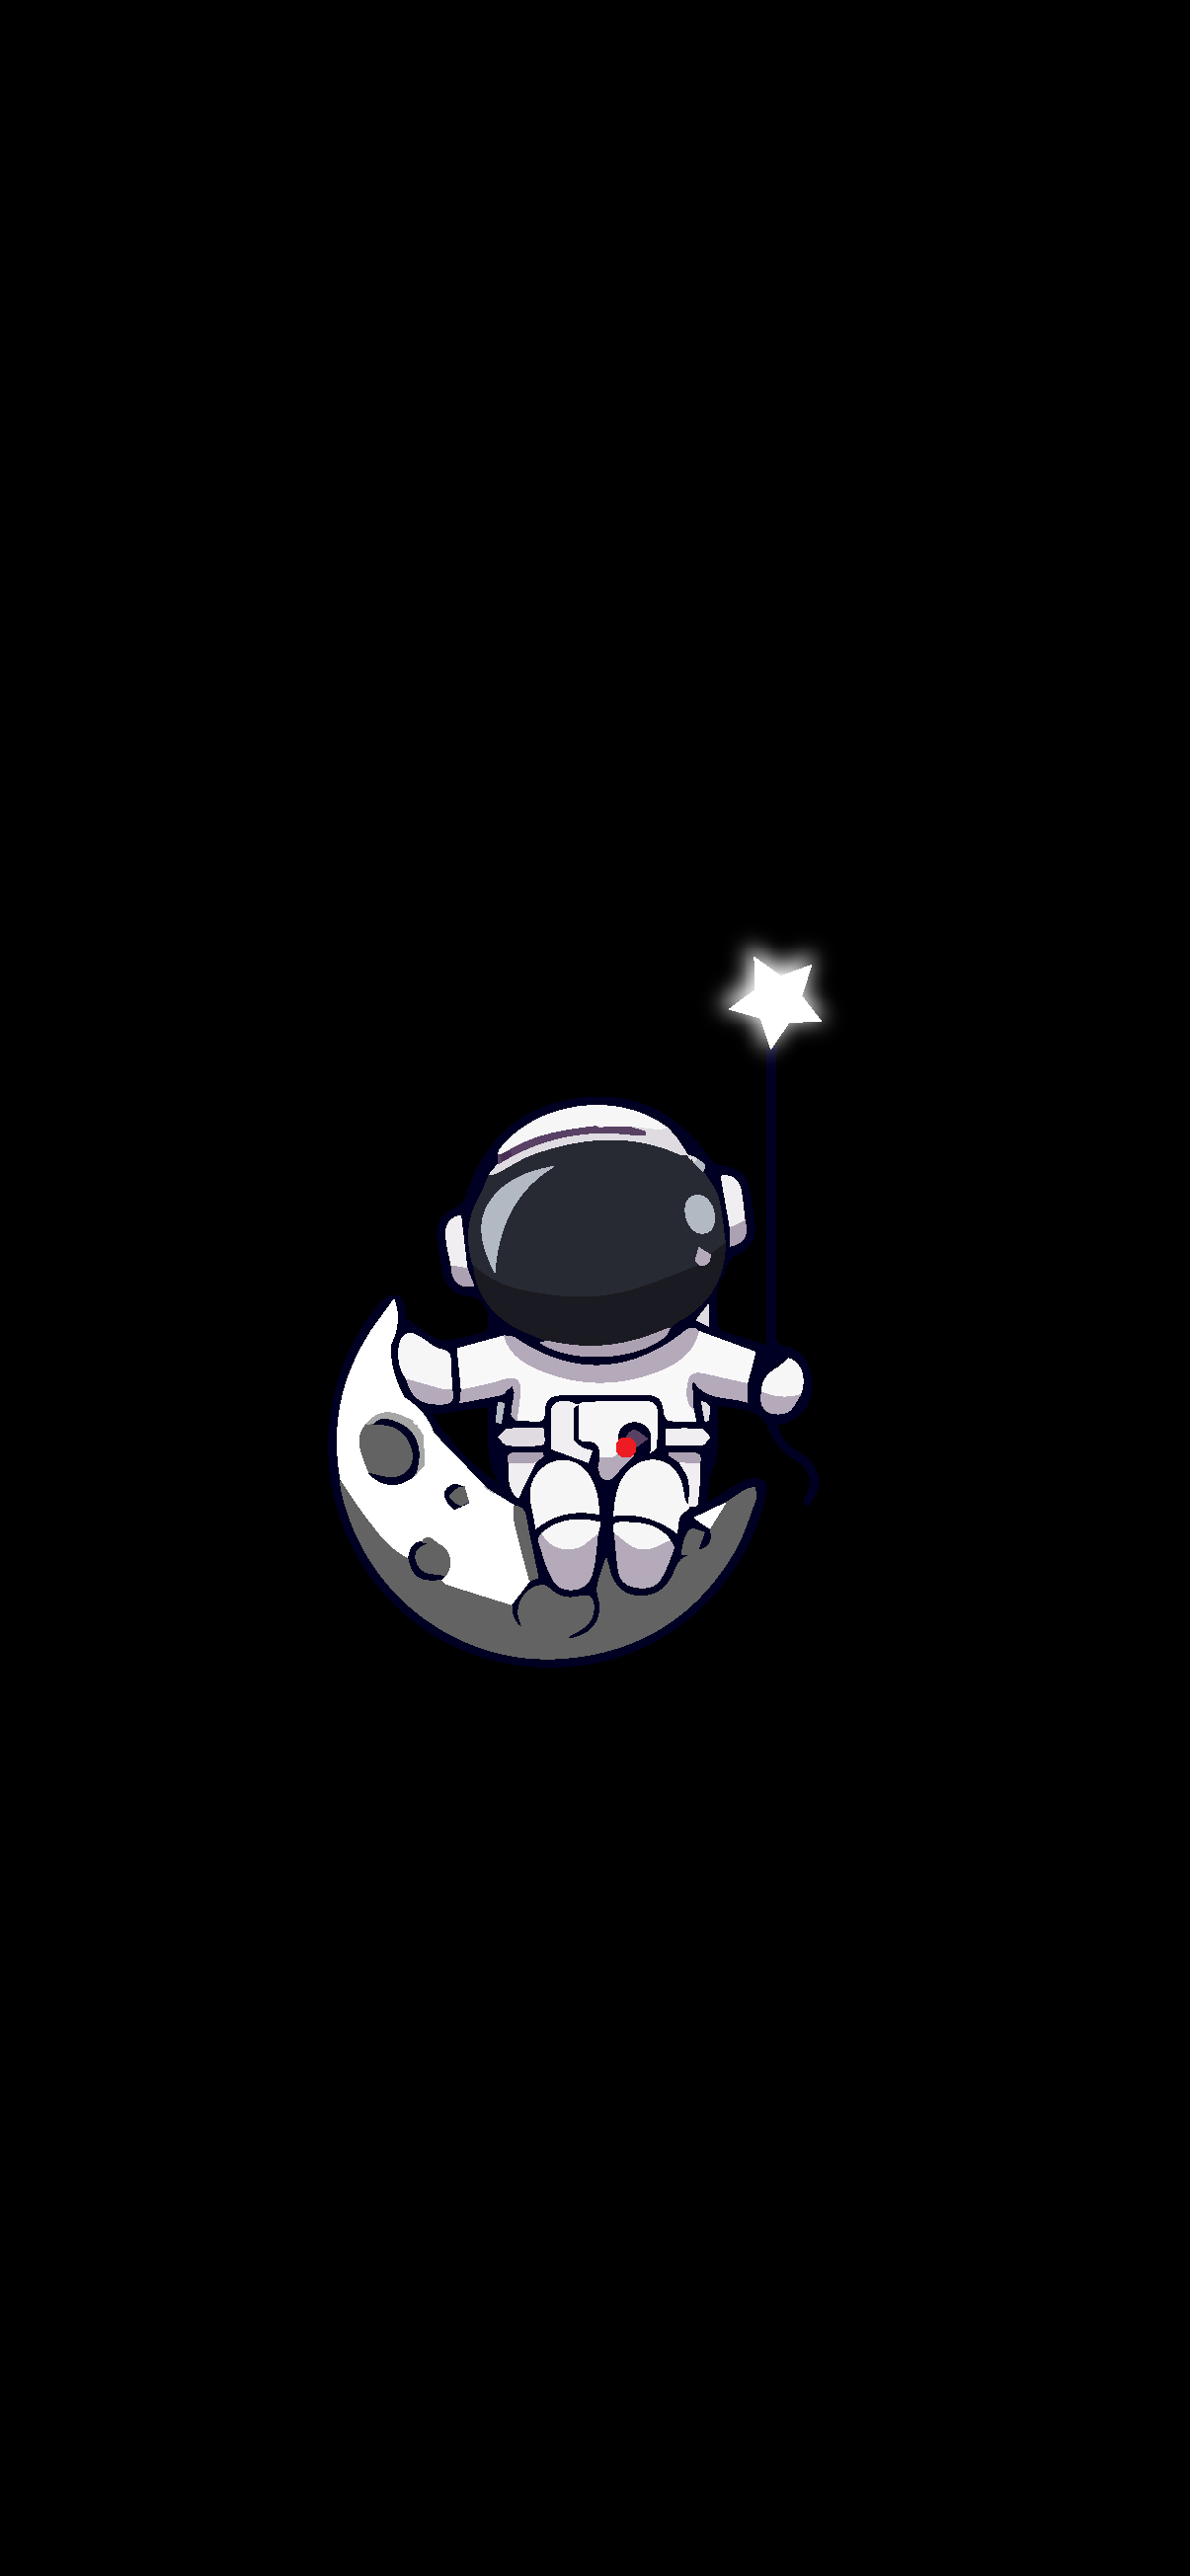 Live gift  Space drawings Astronaut wallpaper Astronaut illustration